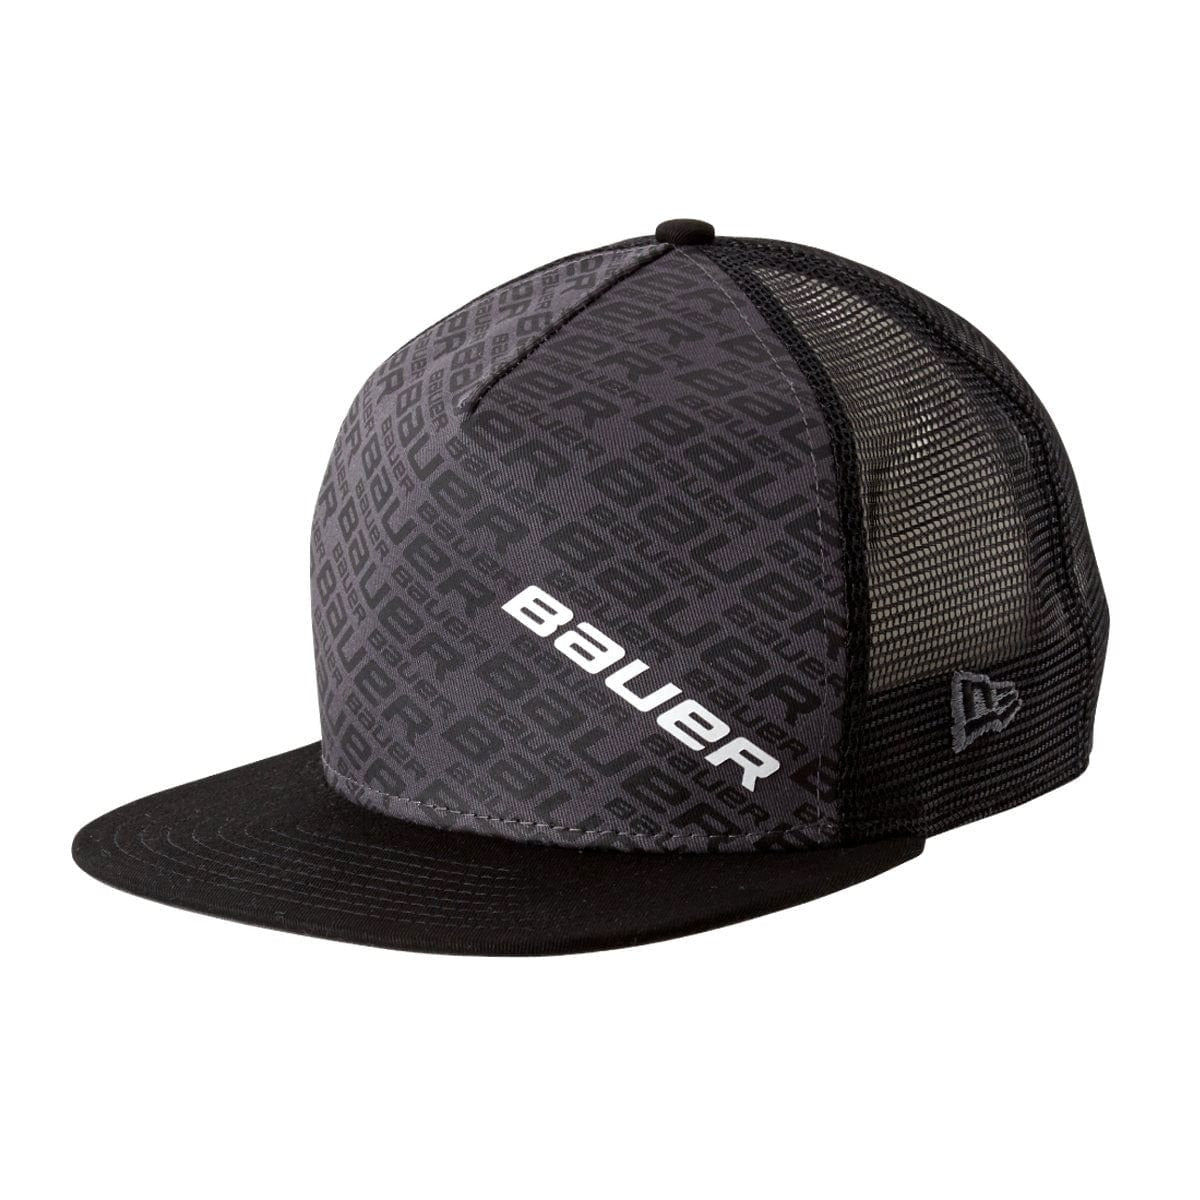 Bauer 9Fifty Repeat Snapback Hat